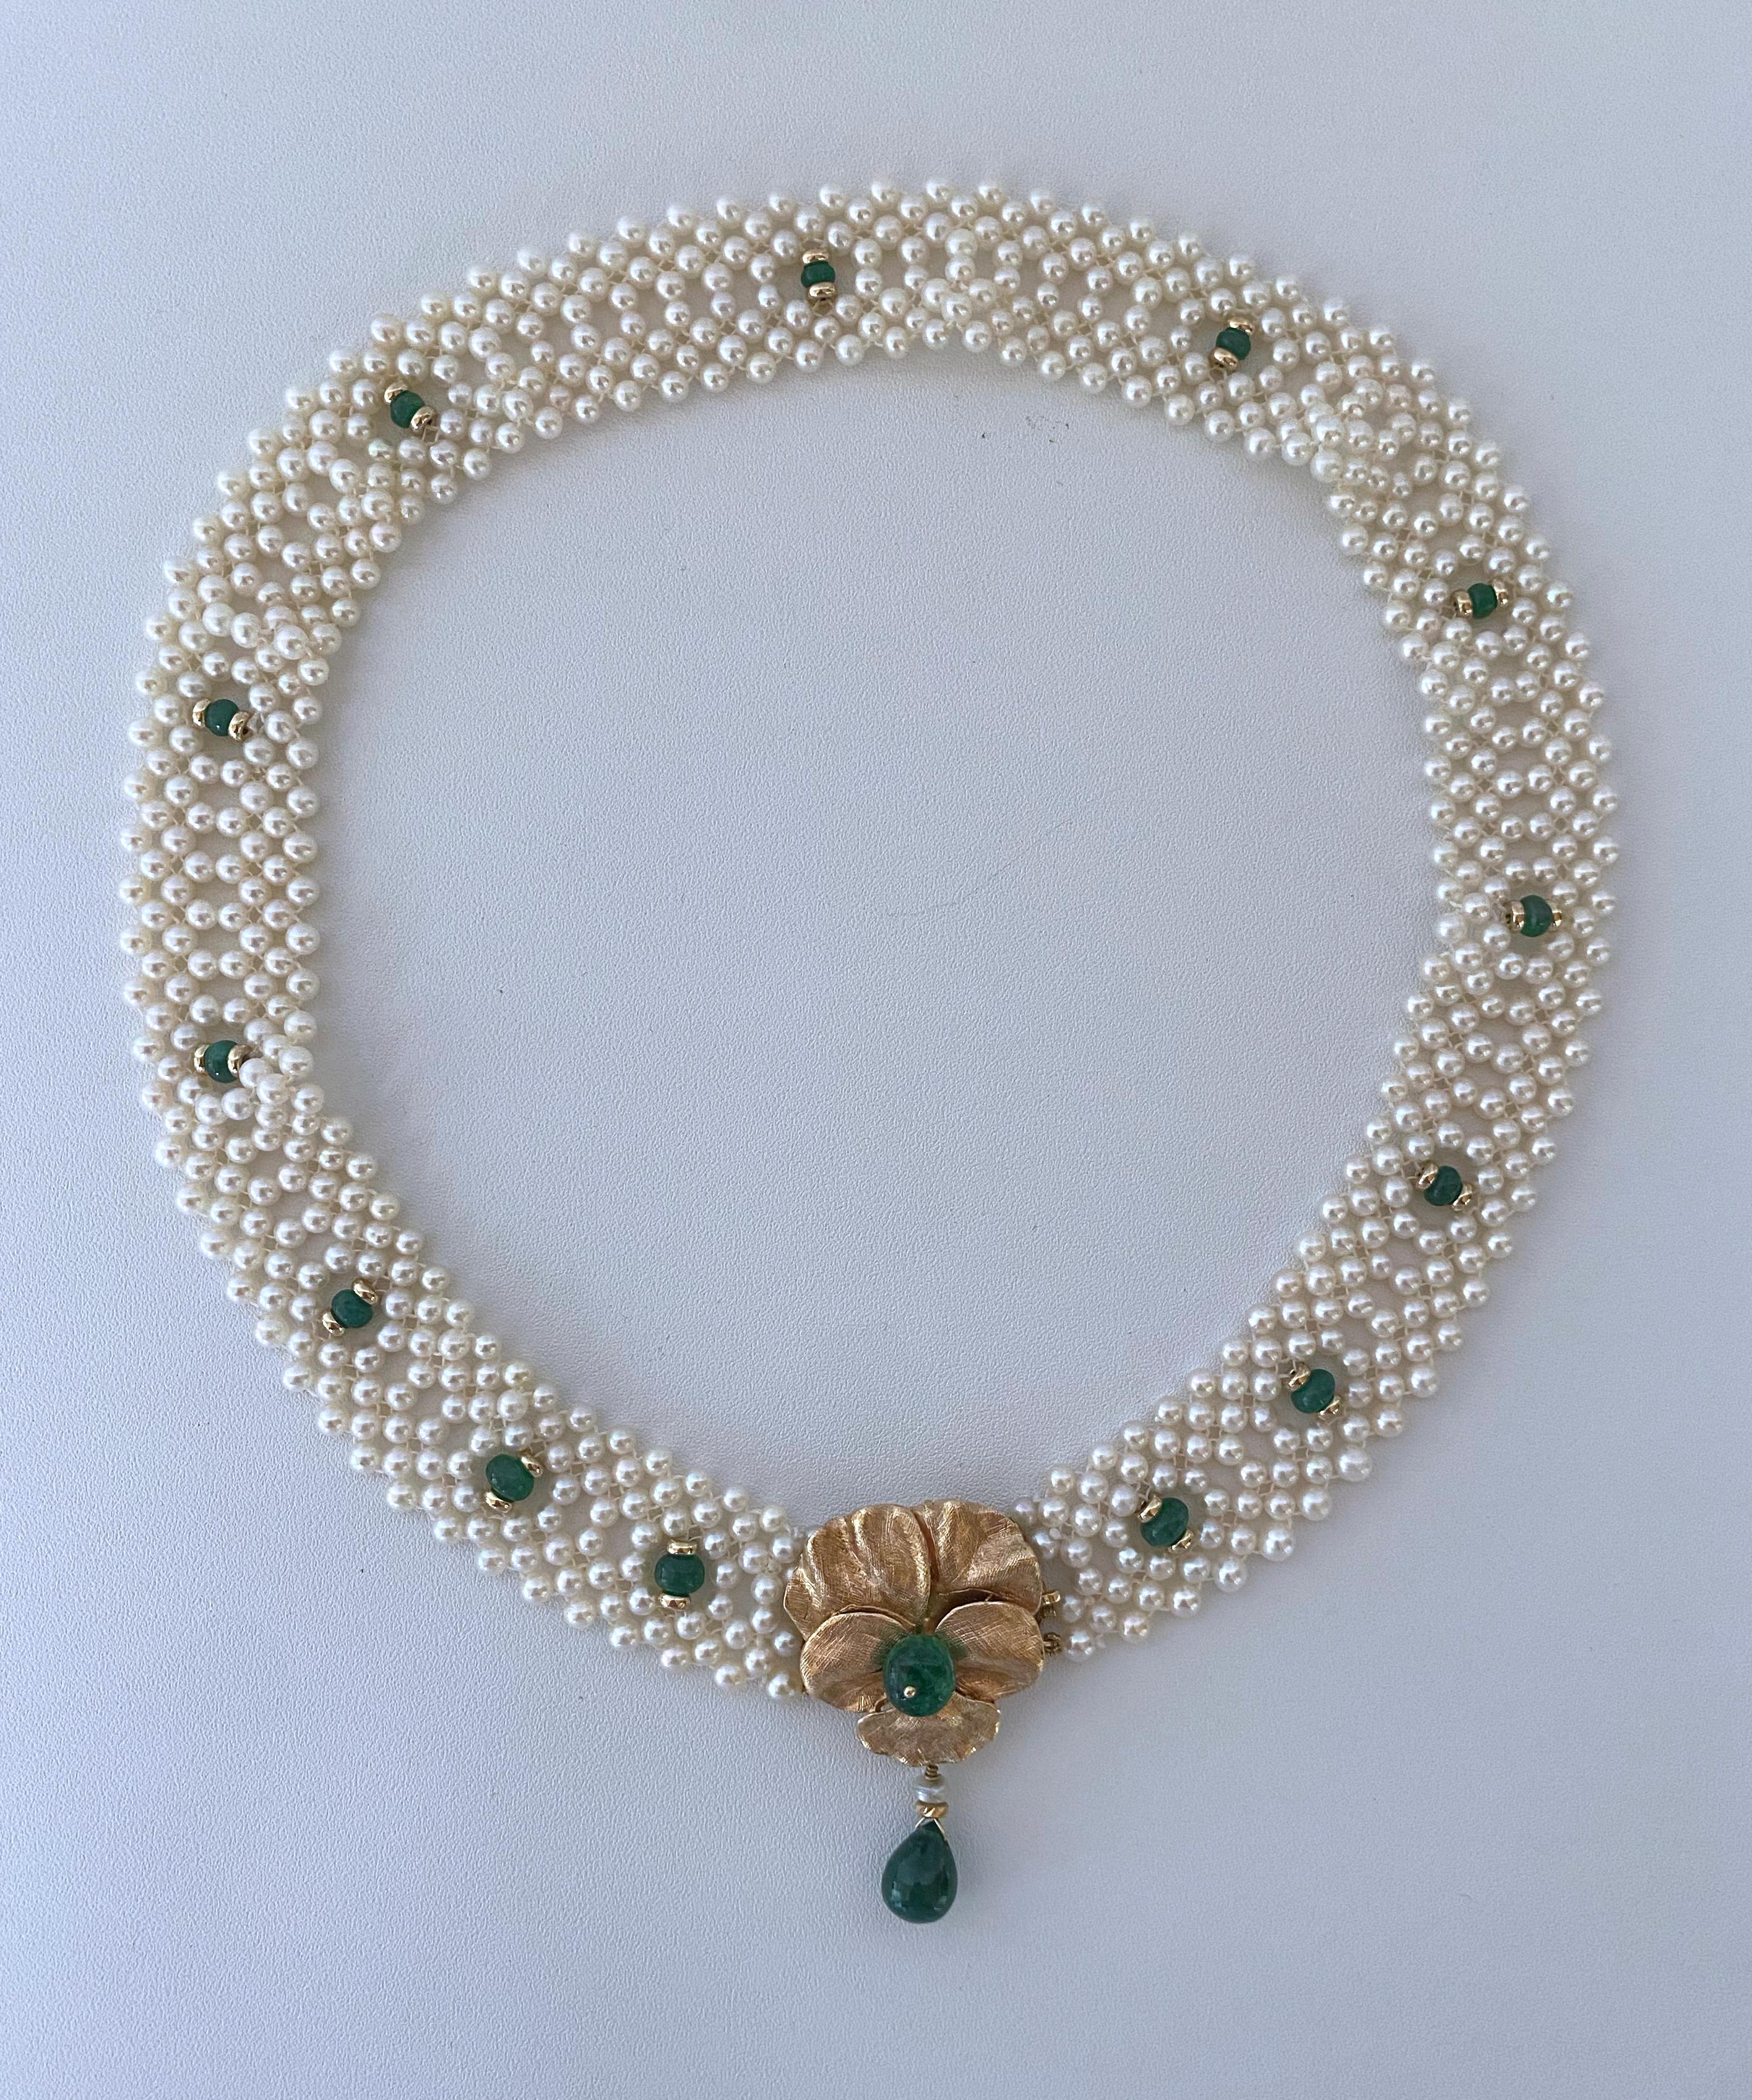 Marina J Woven Pearl & Emerald Infinity Necklace with Vintage 14k Centerpiece 10